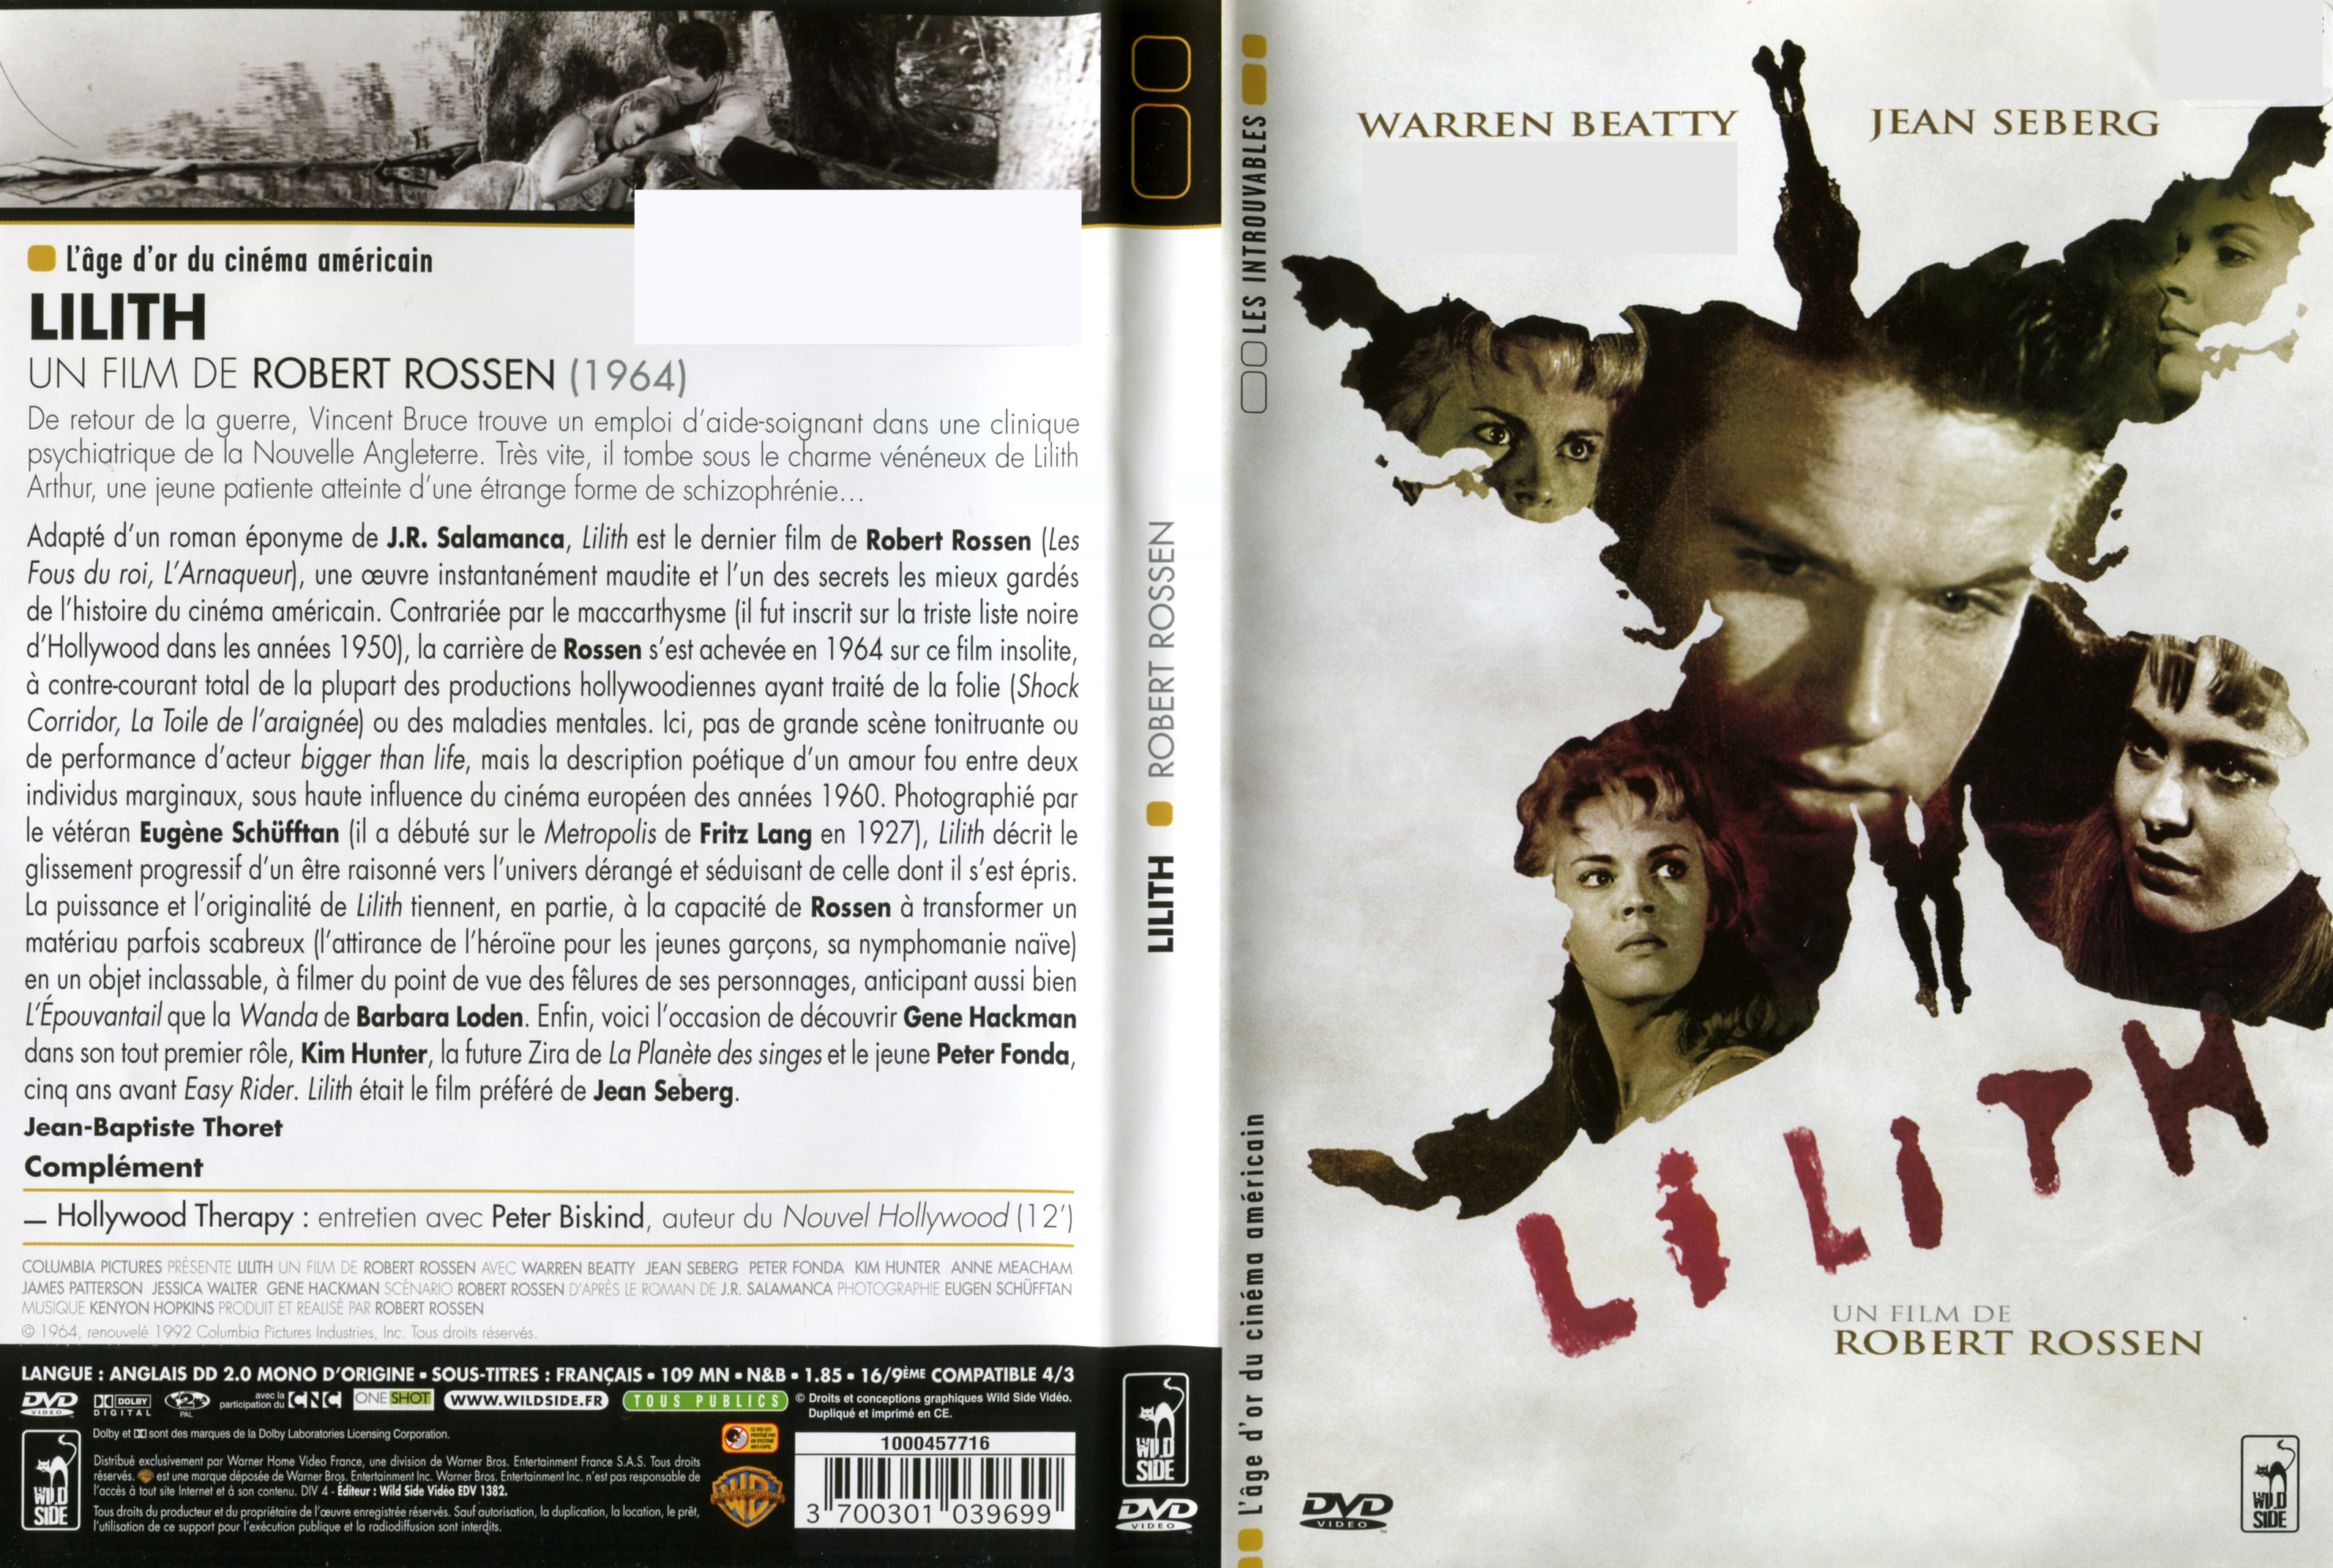 Jaquette DVD Lilith (1964)